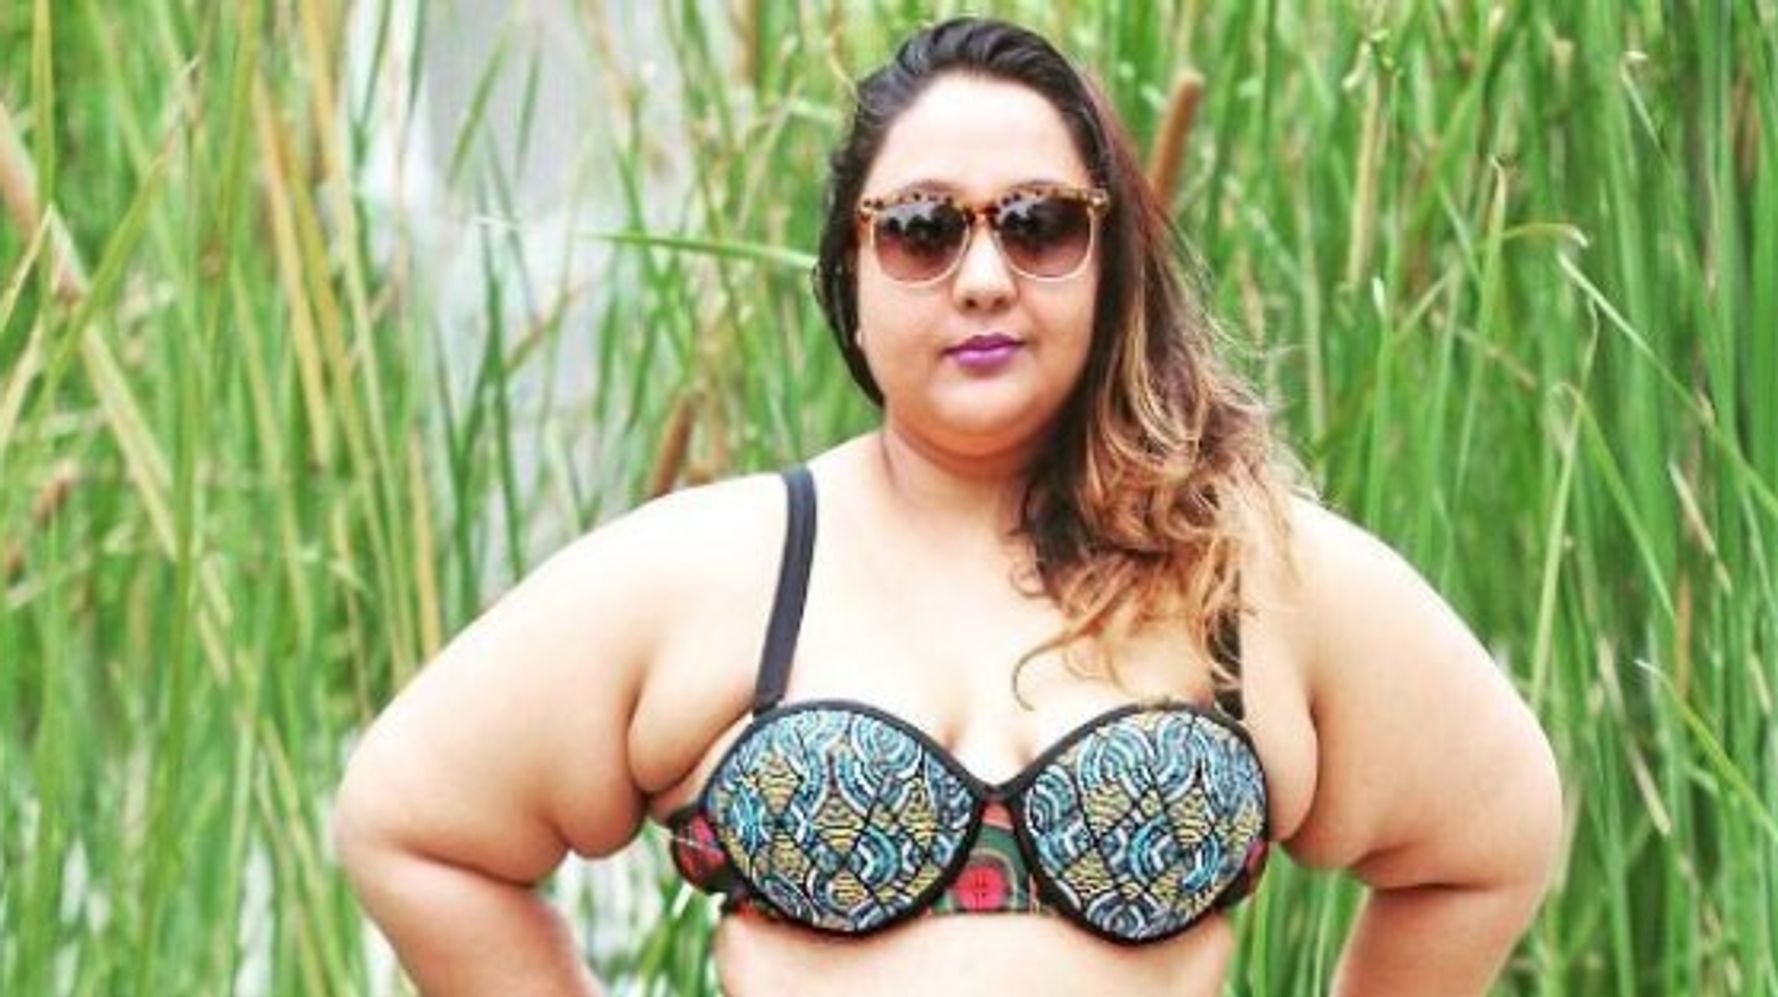 Bbw Wife At Nude Beach - Indian Plus-Size Blogger Aarti Olivia Dubey Has Best Response After  Instagram Removes Her Bikini Pic | HuffPost Style